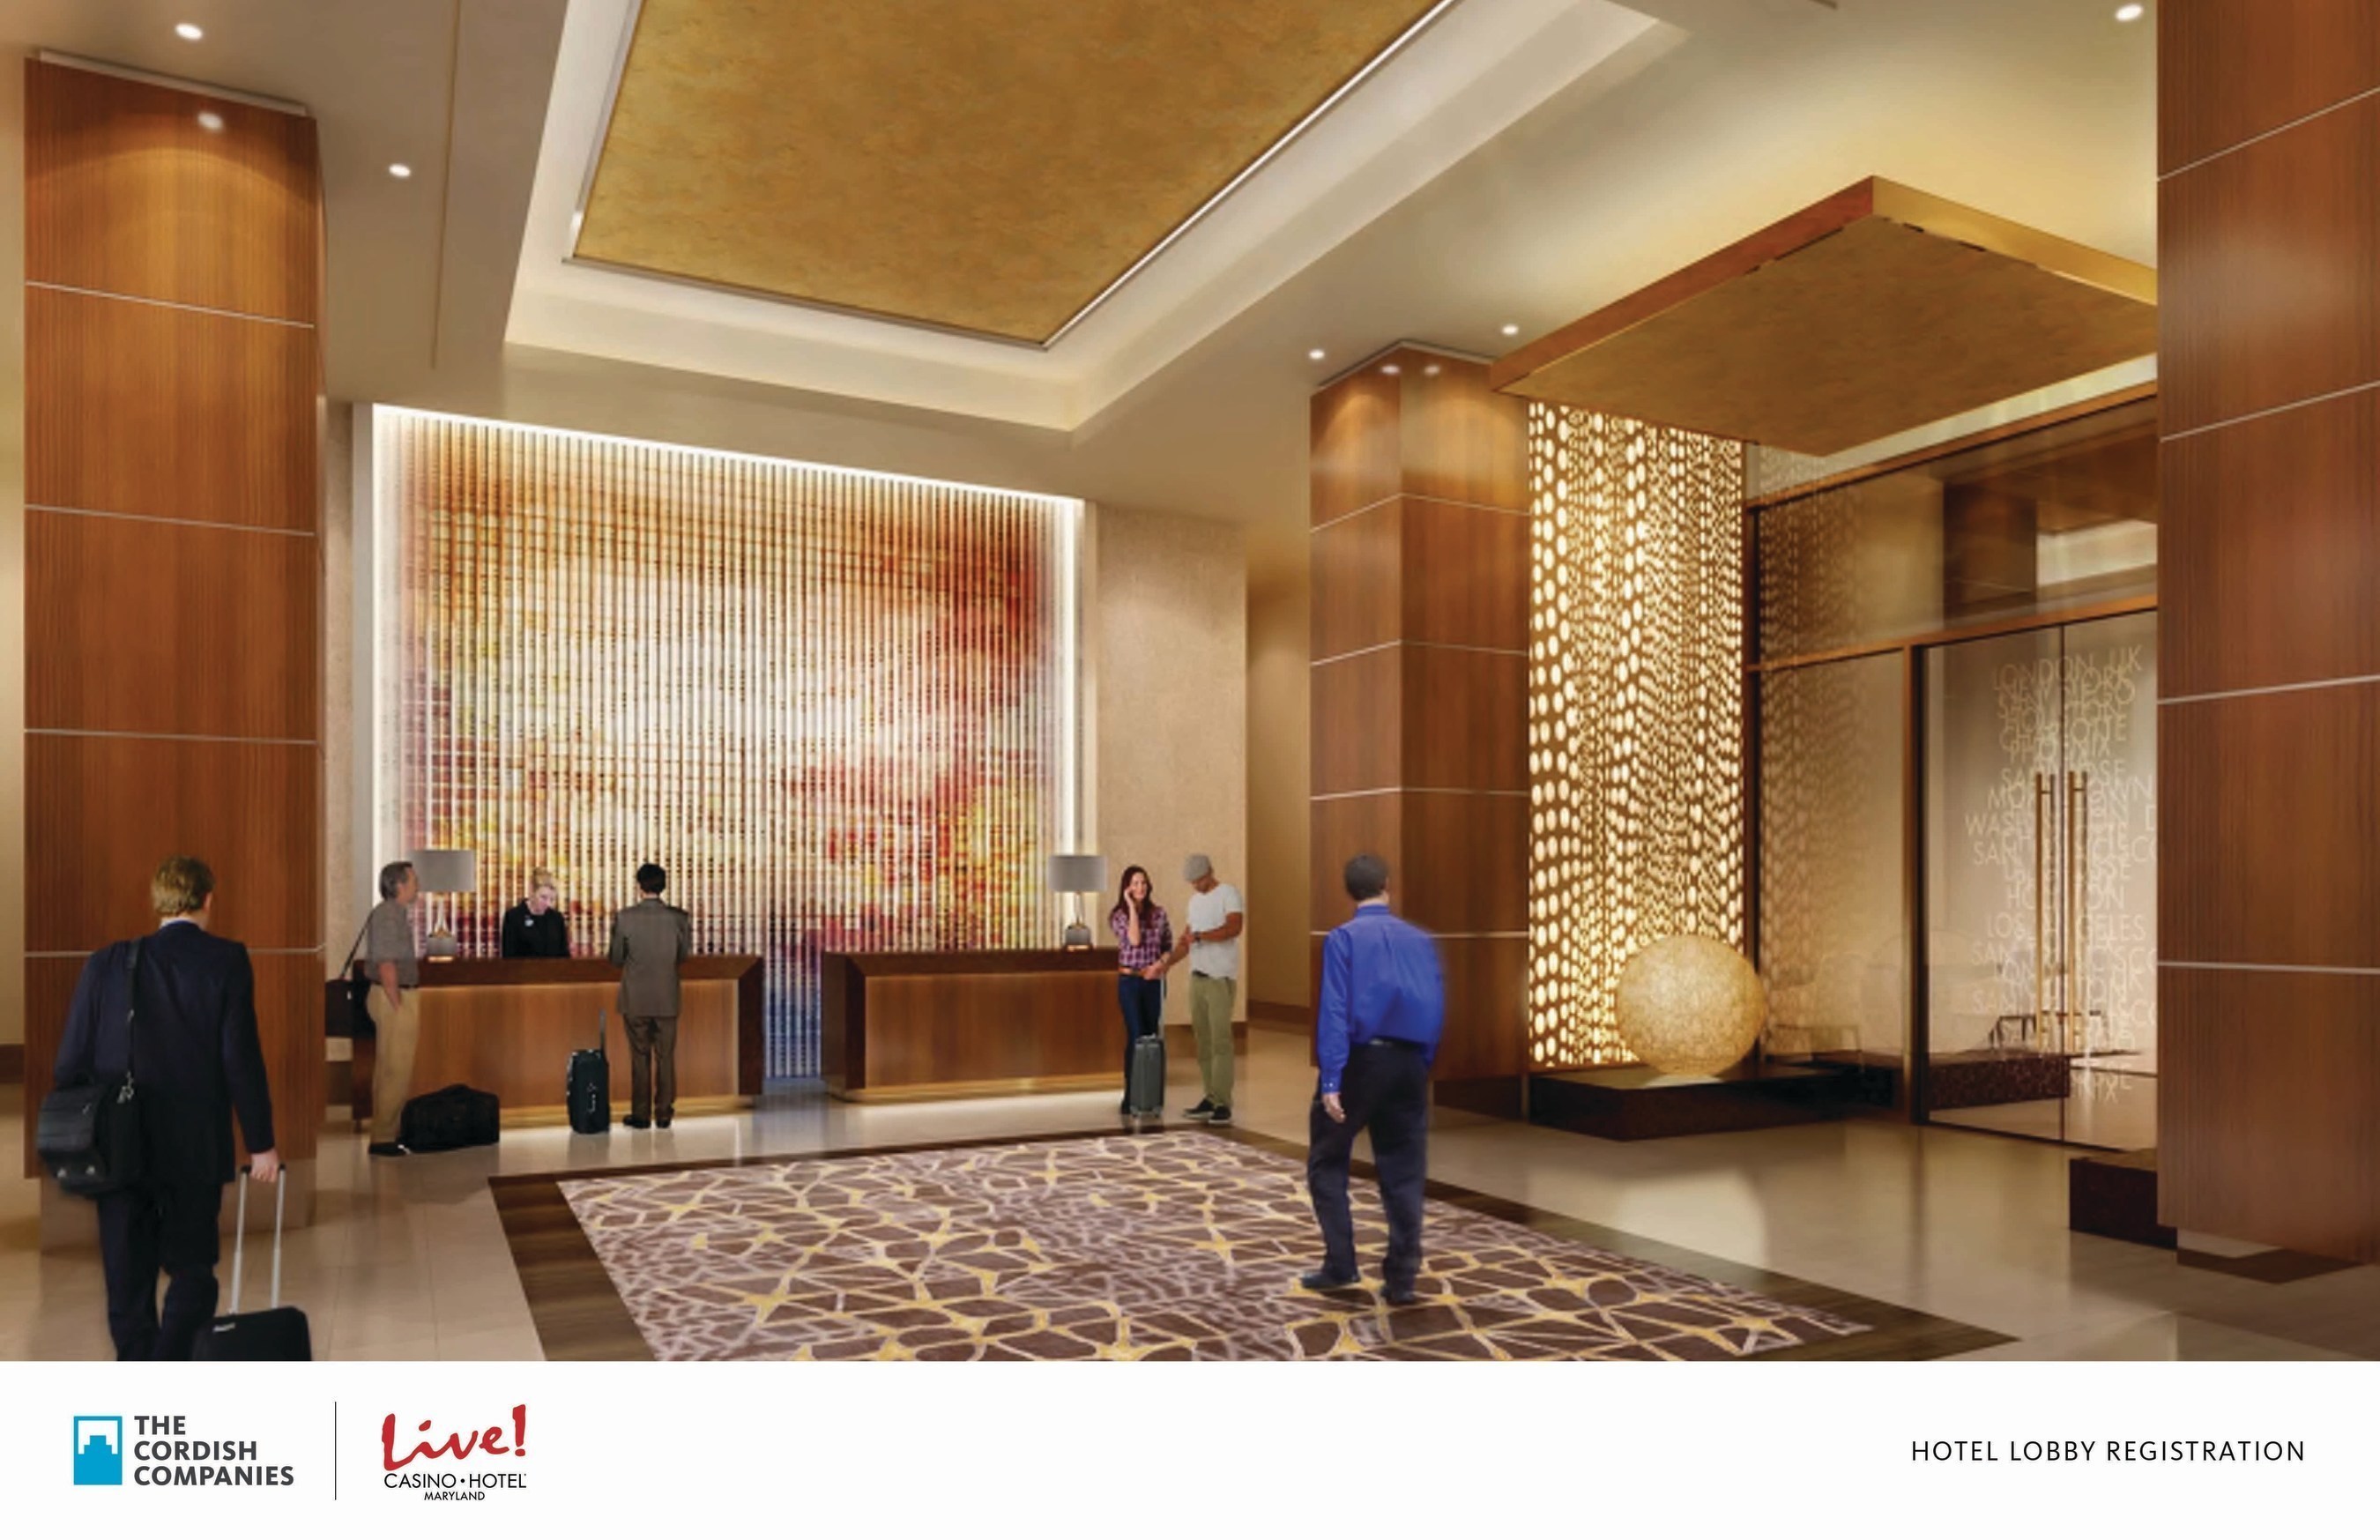 An artists' rendering depicts the Hotel Lobby of the new $200 million flagship Live! Hotel. The Cordish Companies today broke ground on the development, which will be located at Maryland Live! Casino, in Hanover, MD. The 350,000- square- foot property features a 17-story hotel tower, making it the tallest building in Anne Arundel County, with 310 guest rooms, an event center, meeting spaces, new dining options, and a day spa/salon. It is the first hotel in the country to carry the Live! brand.